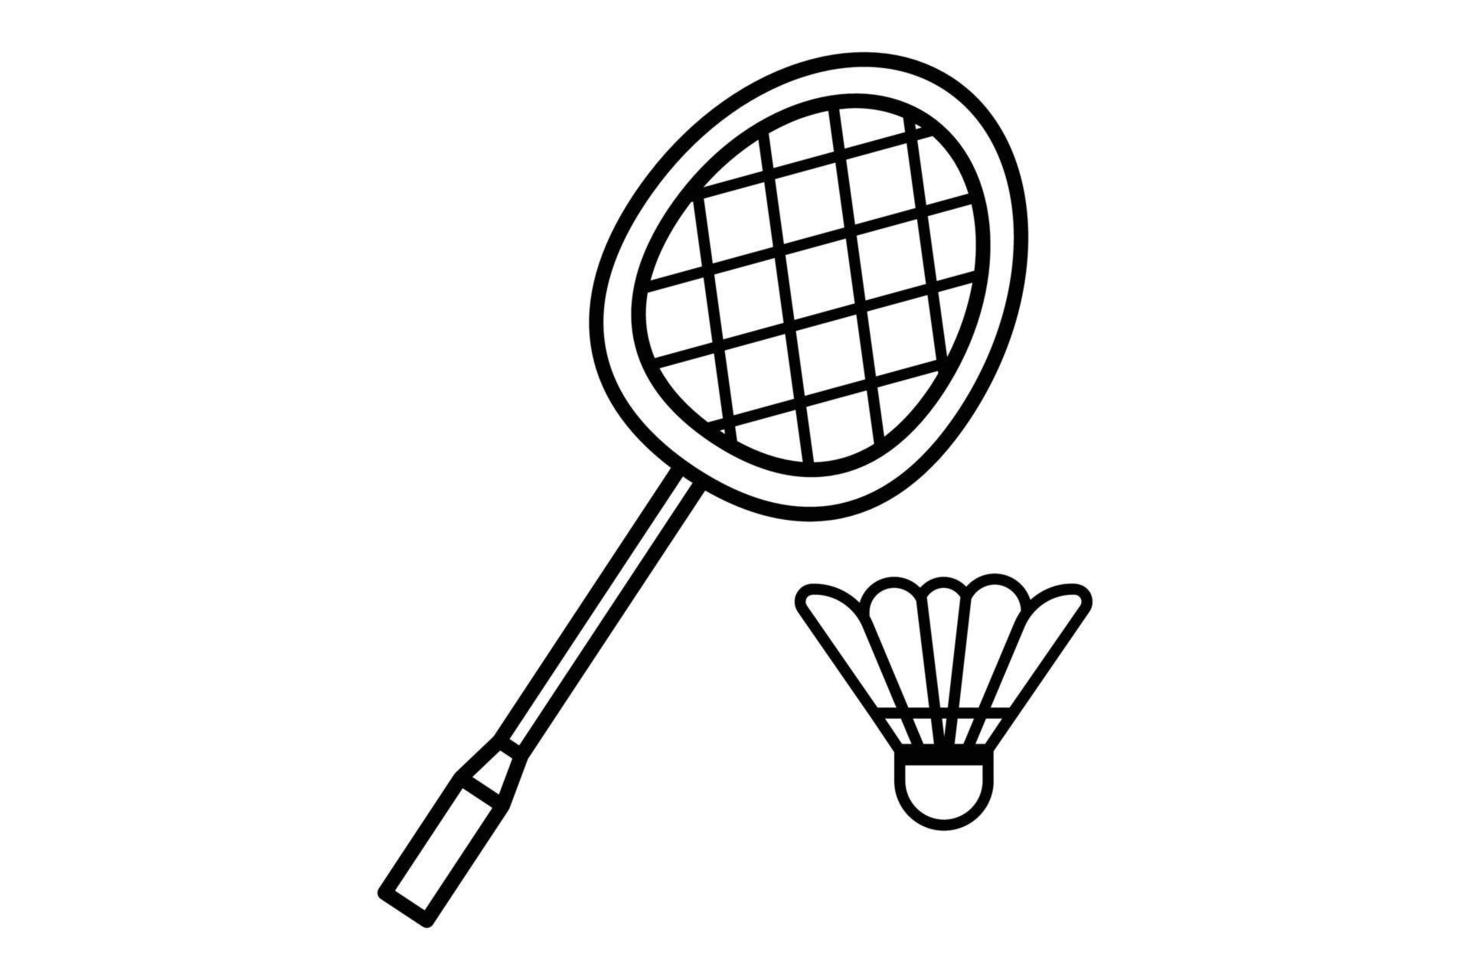 Badminton icon illustration. Racket and shuttlecock. icon related to badminton, sport. outline icon style. Simple vector design editable